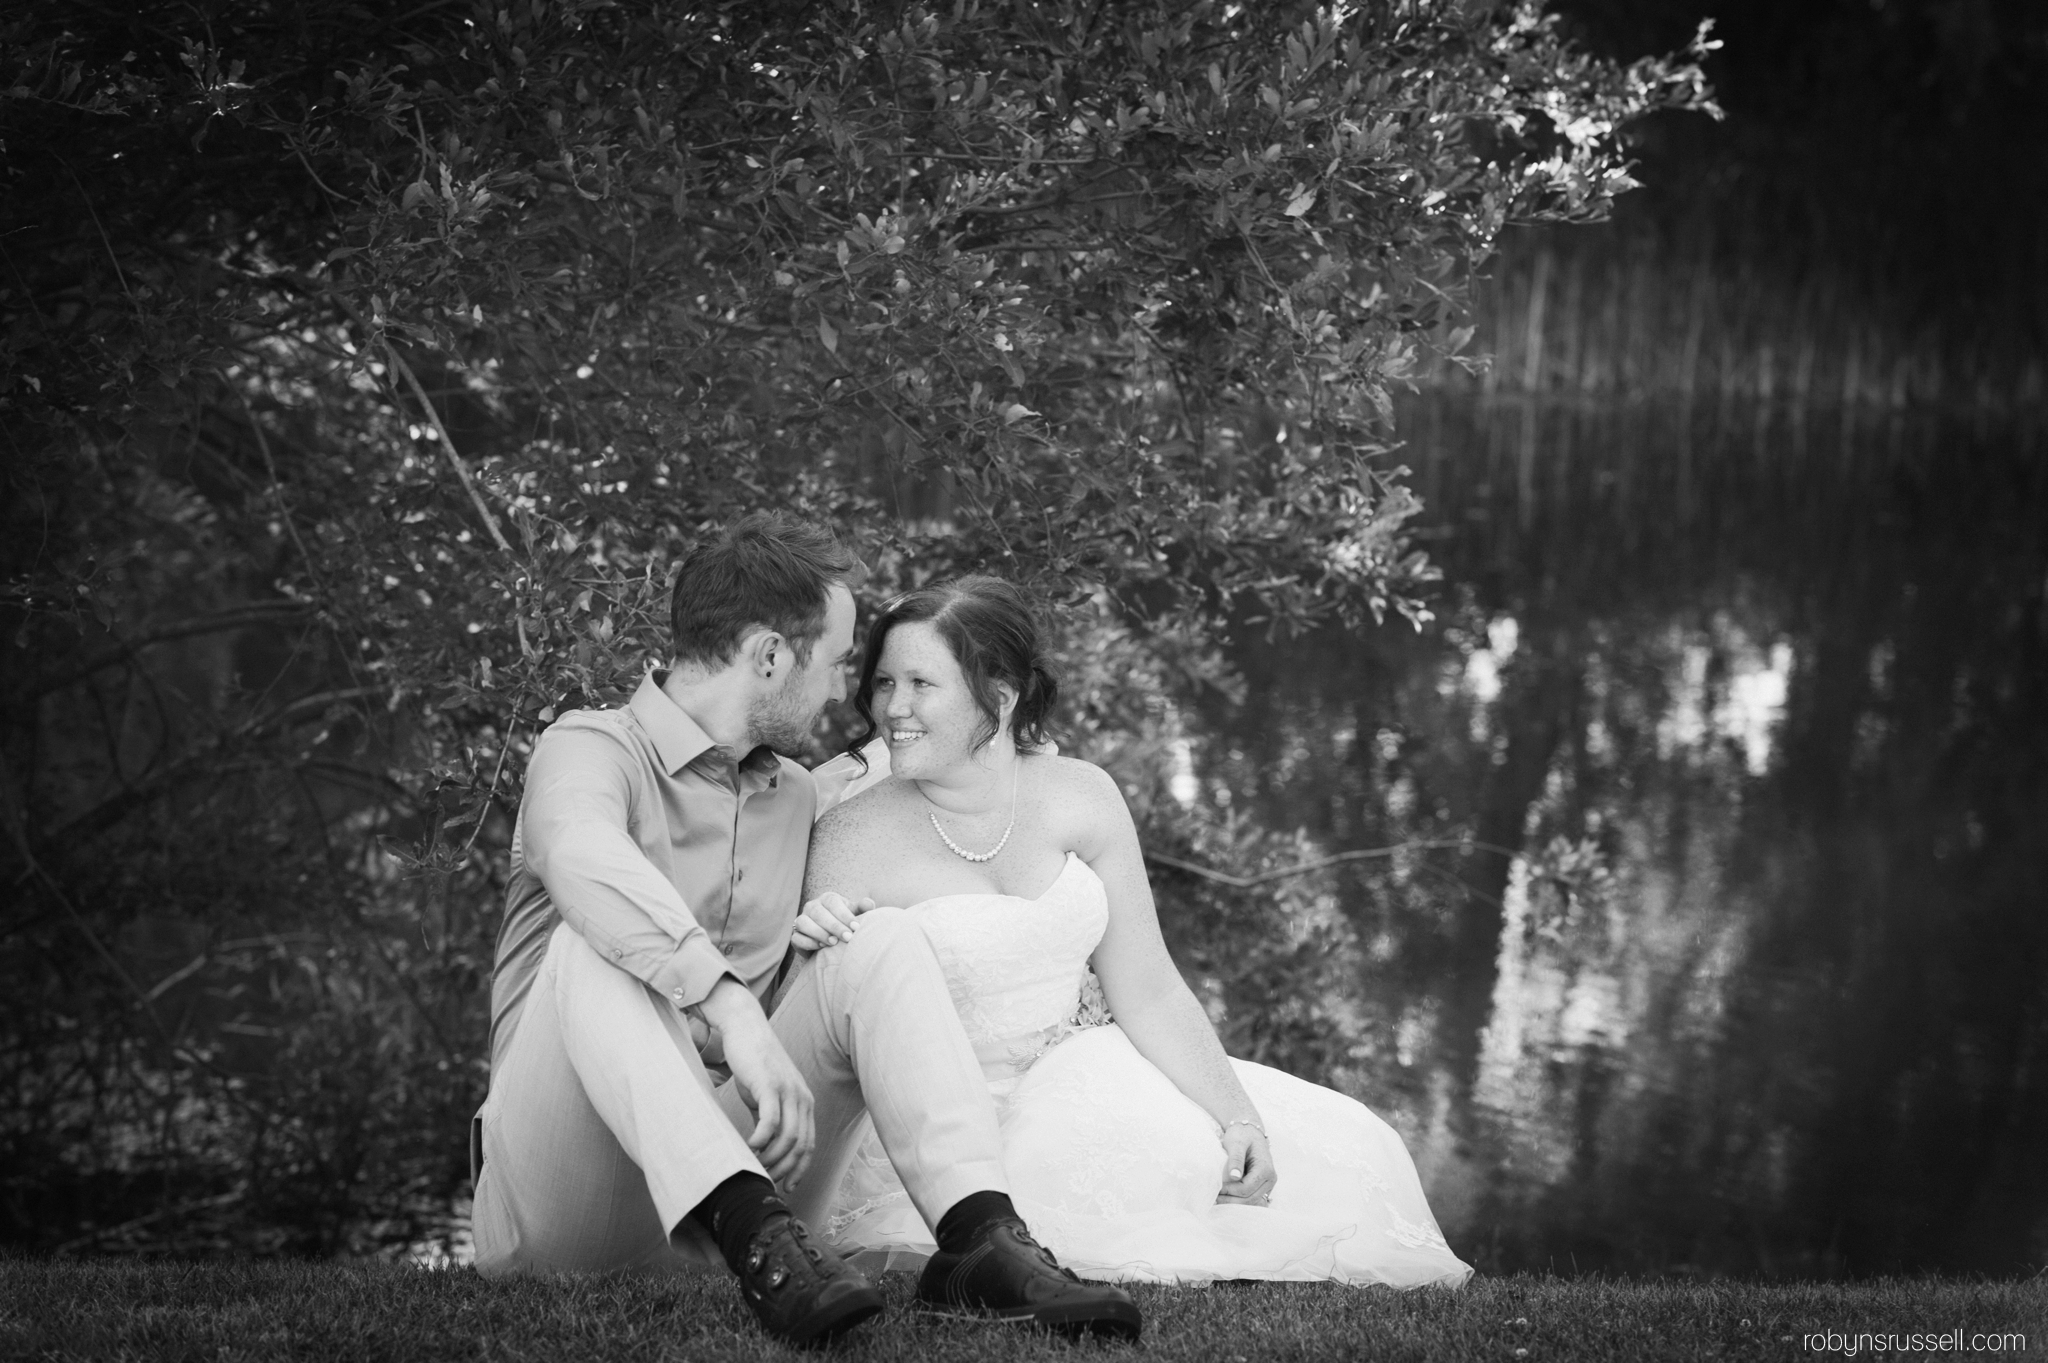 58-bride-and-groom-by-belwood-lake-at-sunset.jpg